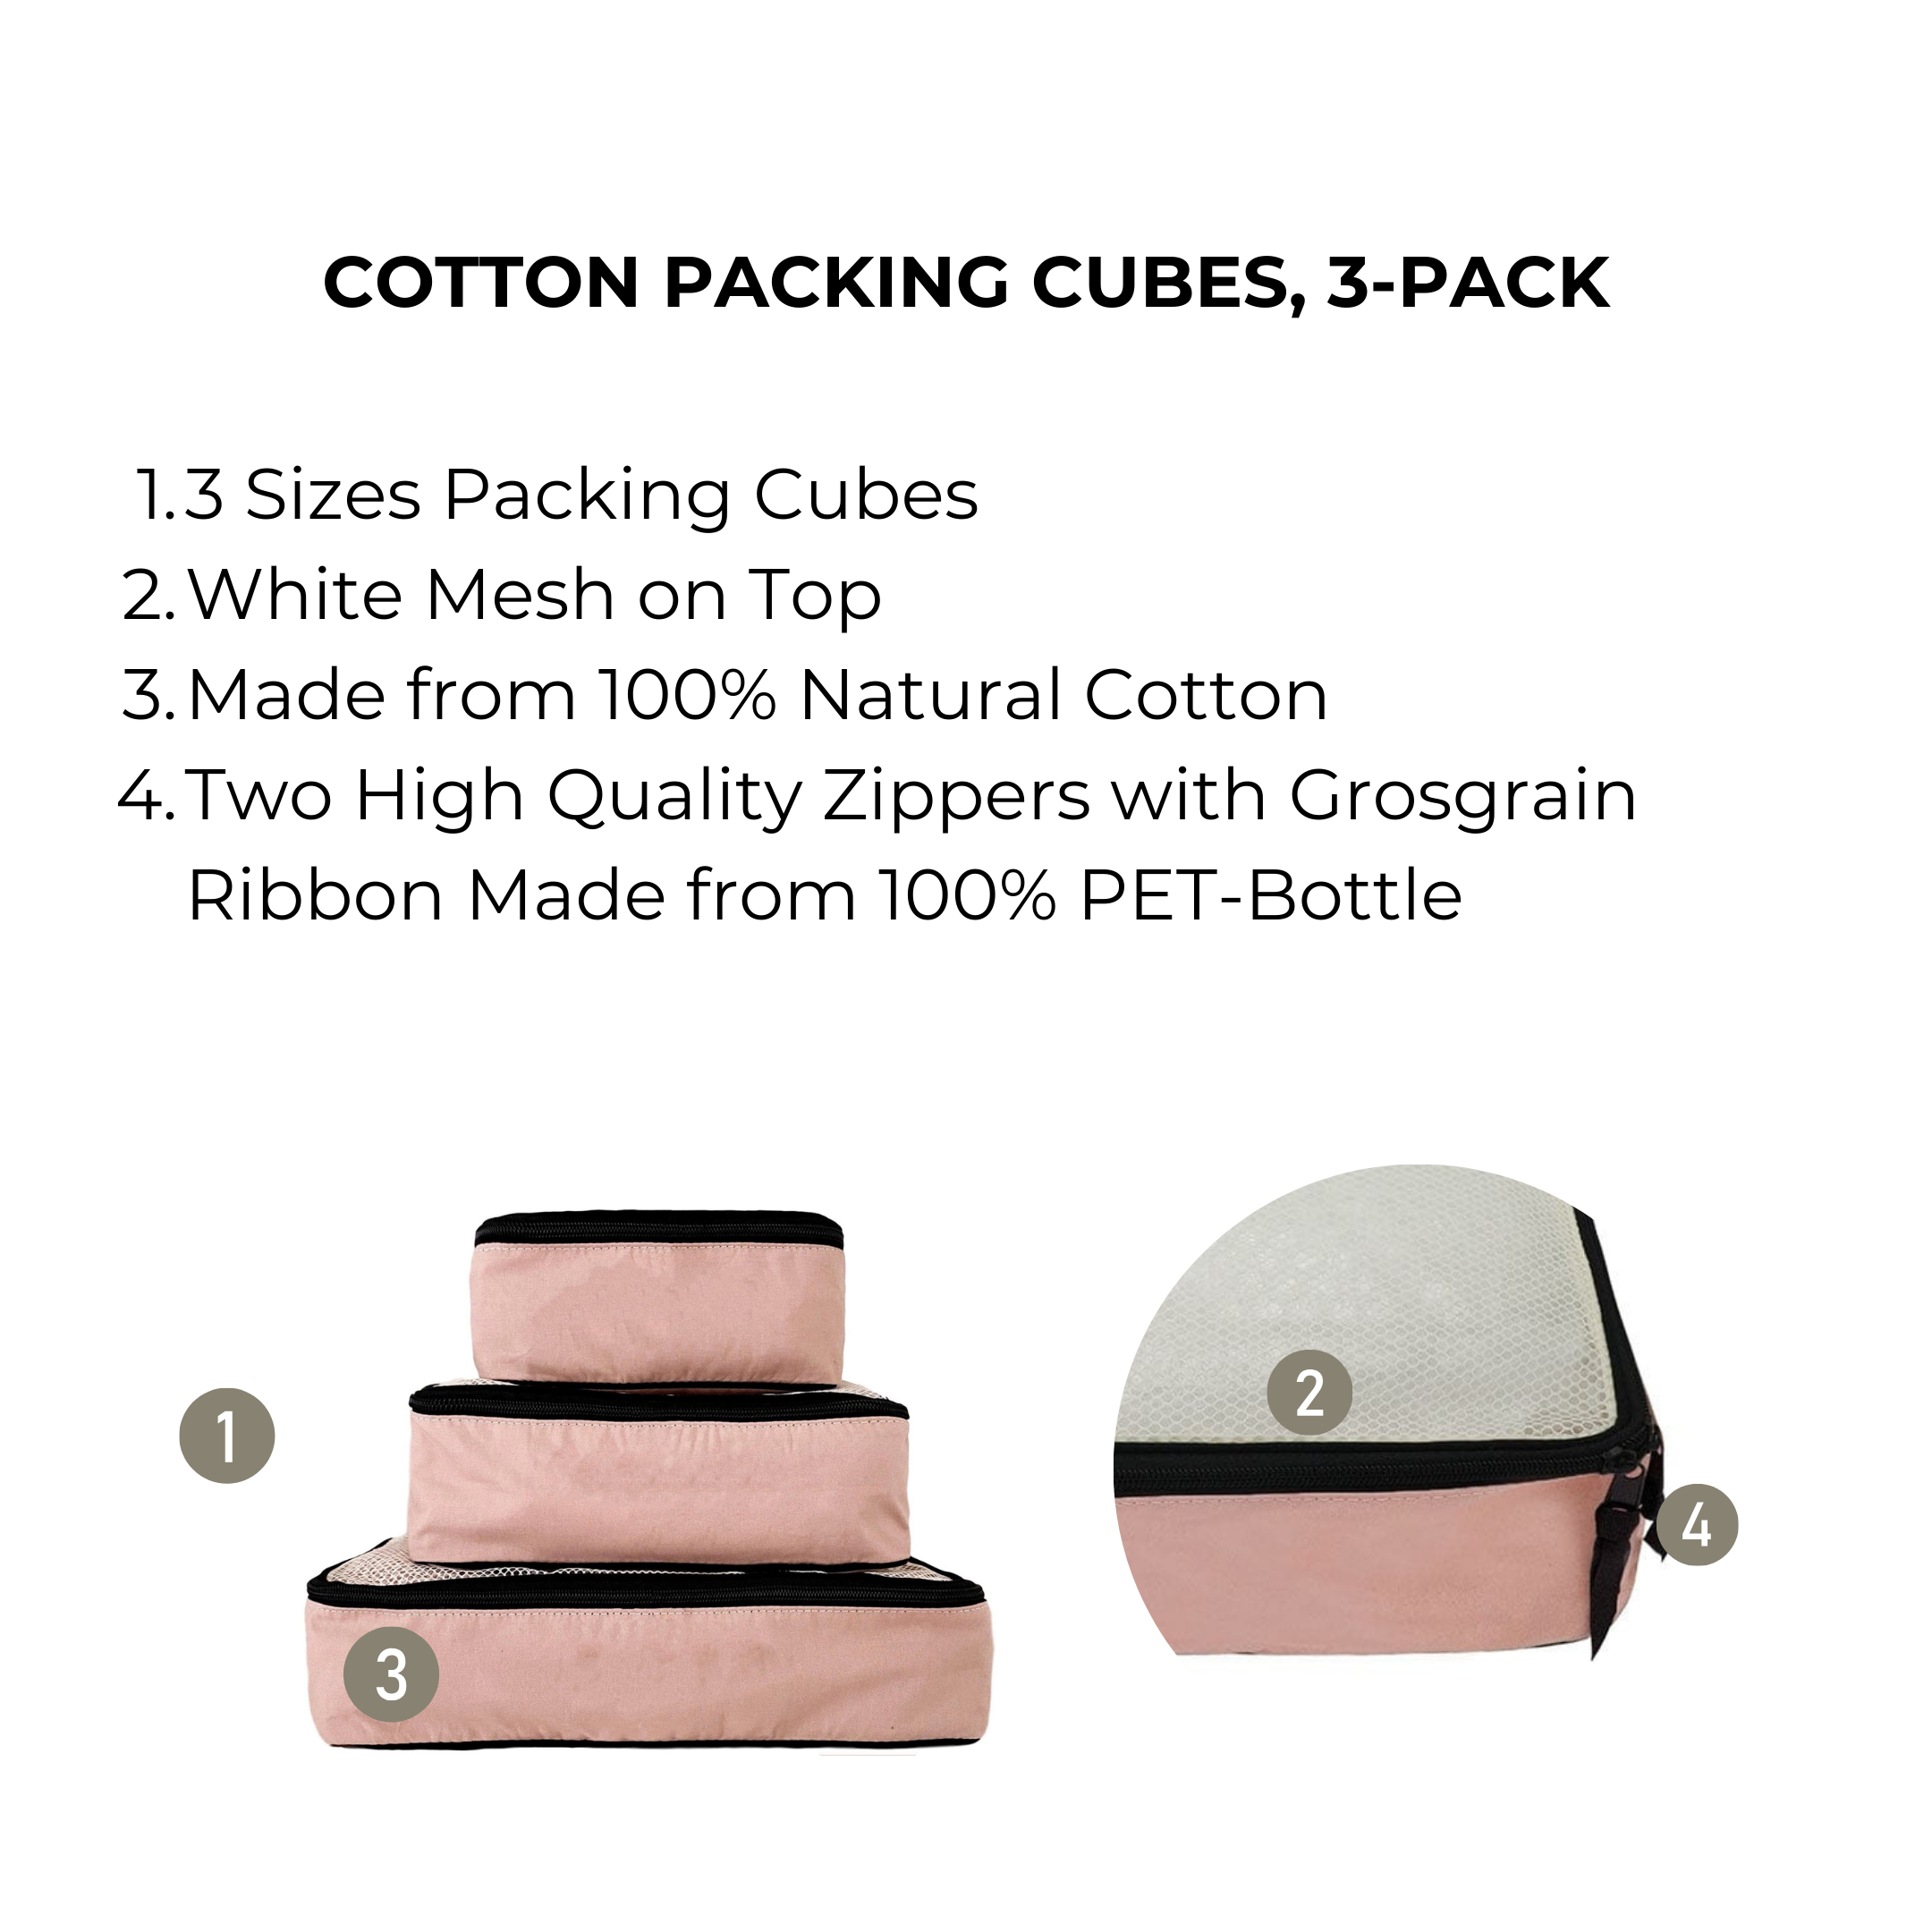 Cotton Packing Cubes, 3-pack Pink/Blush | Bag-all